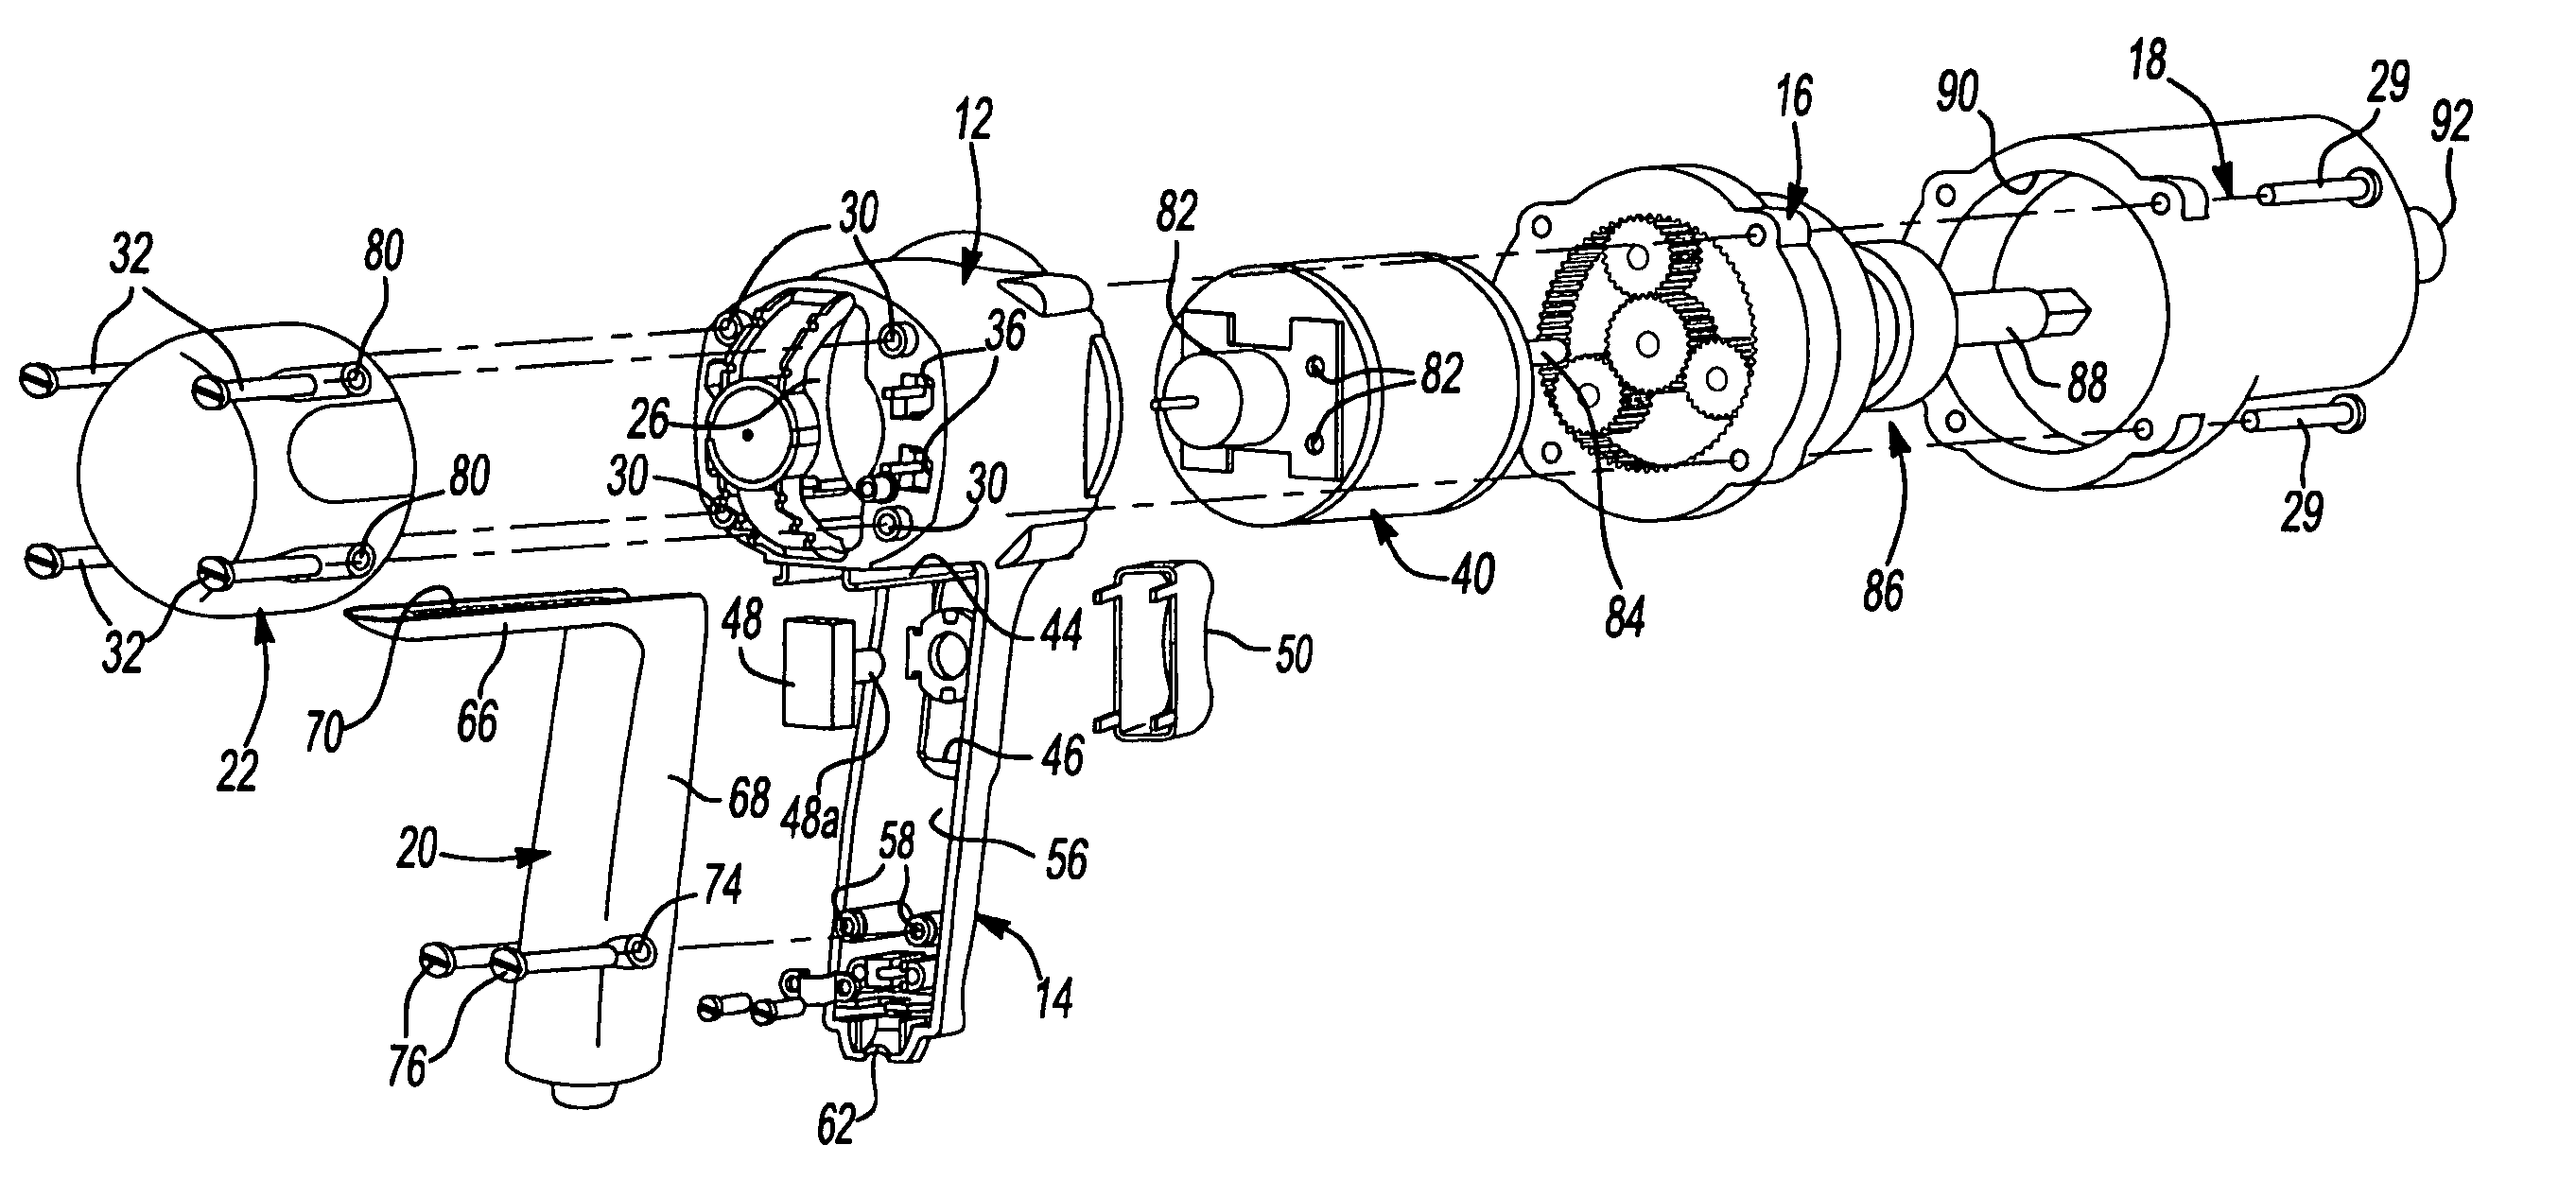 Motor housing and assembly process for power tool